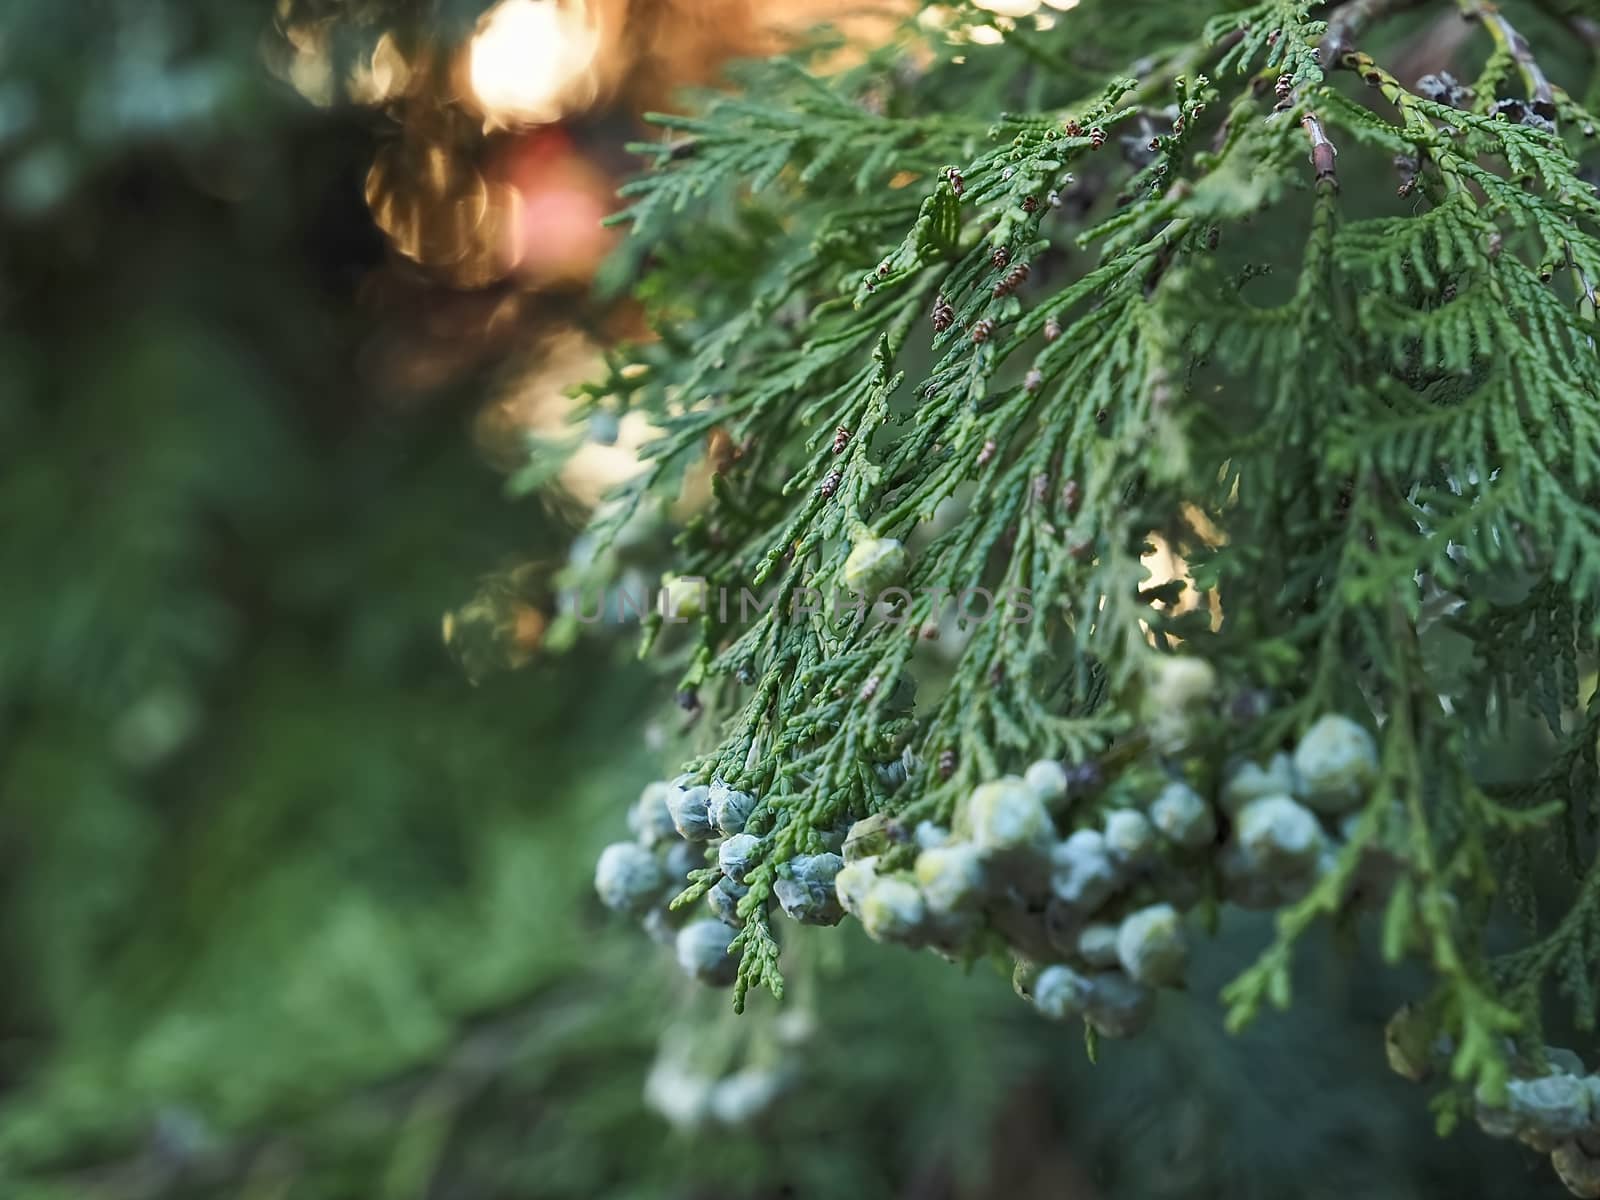 Blooming Thuja tree in in the evening light by Stimmungsbilder